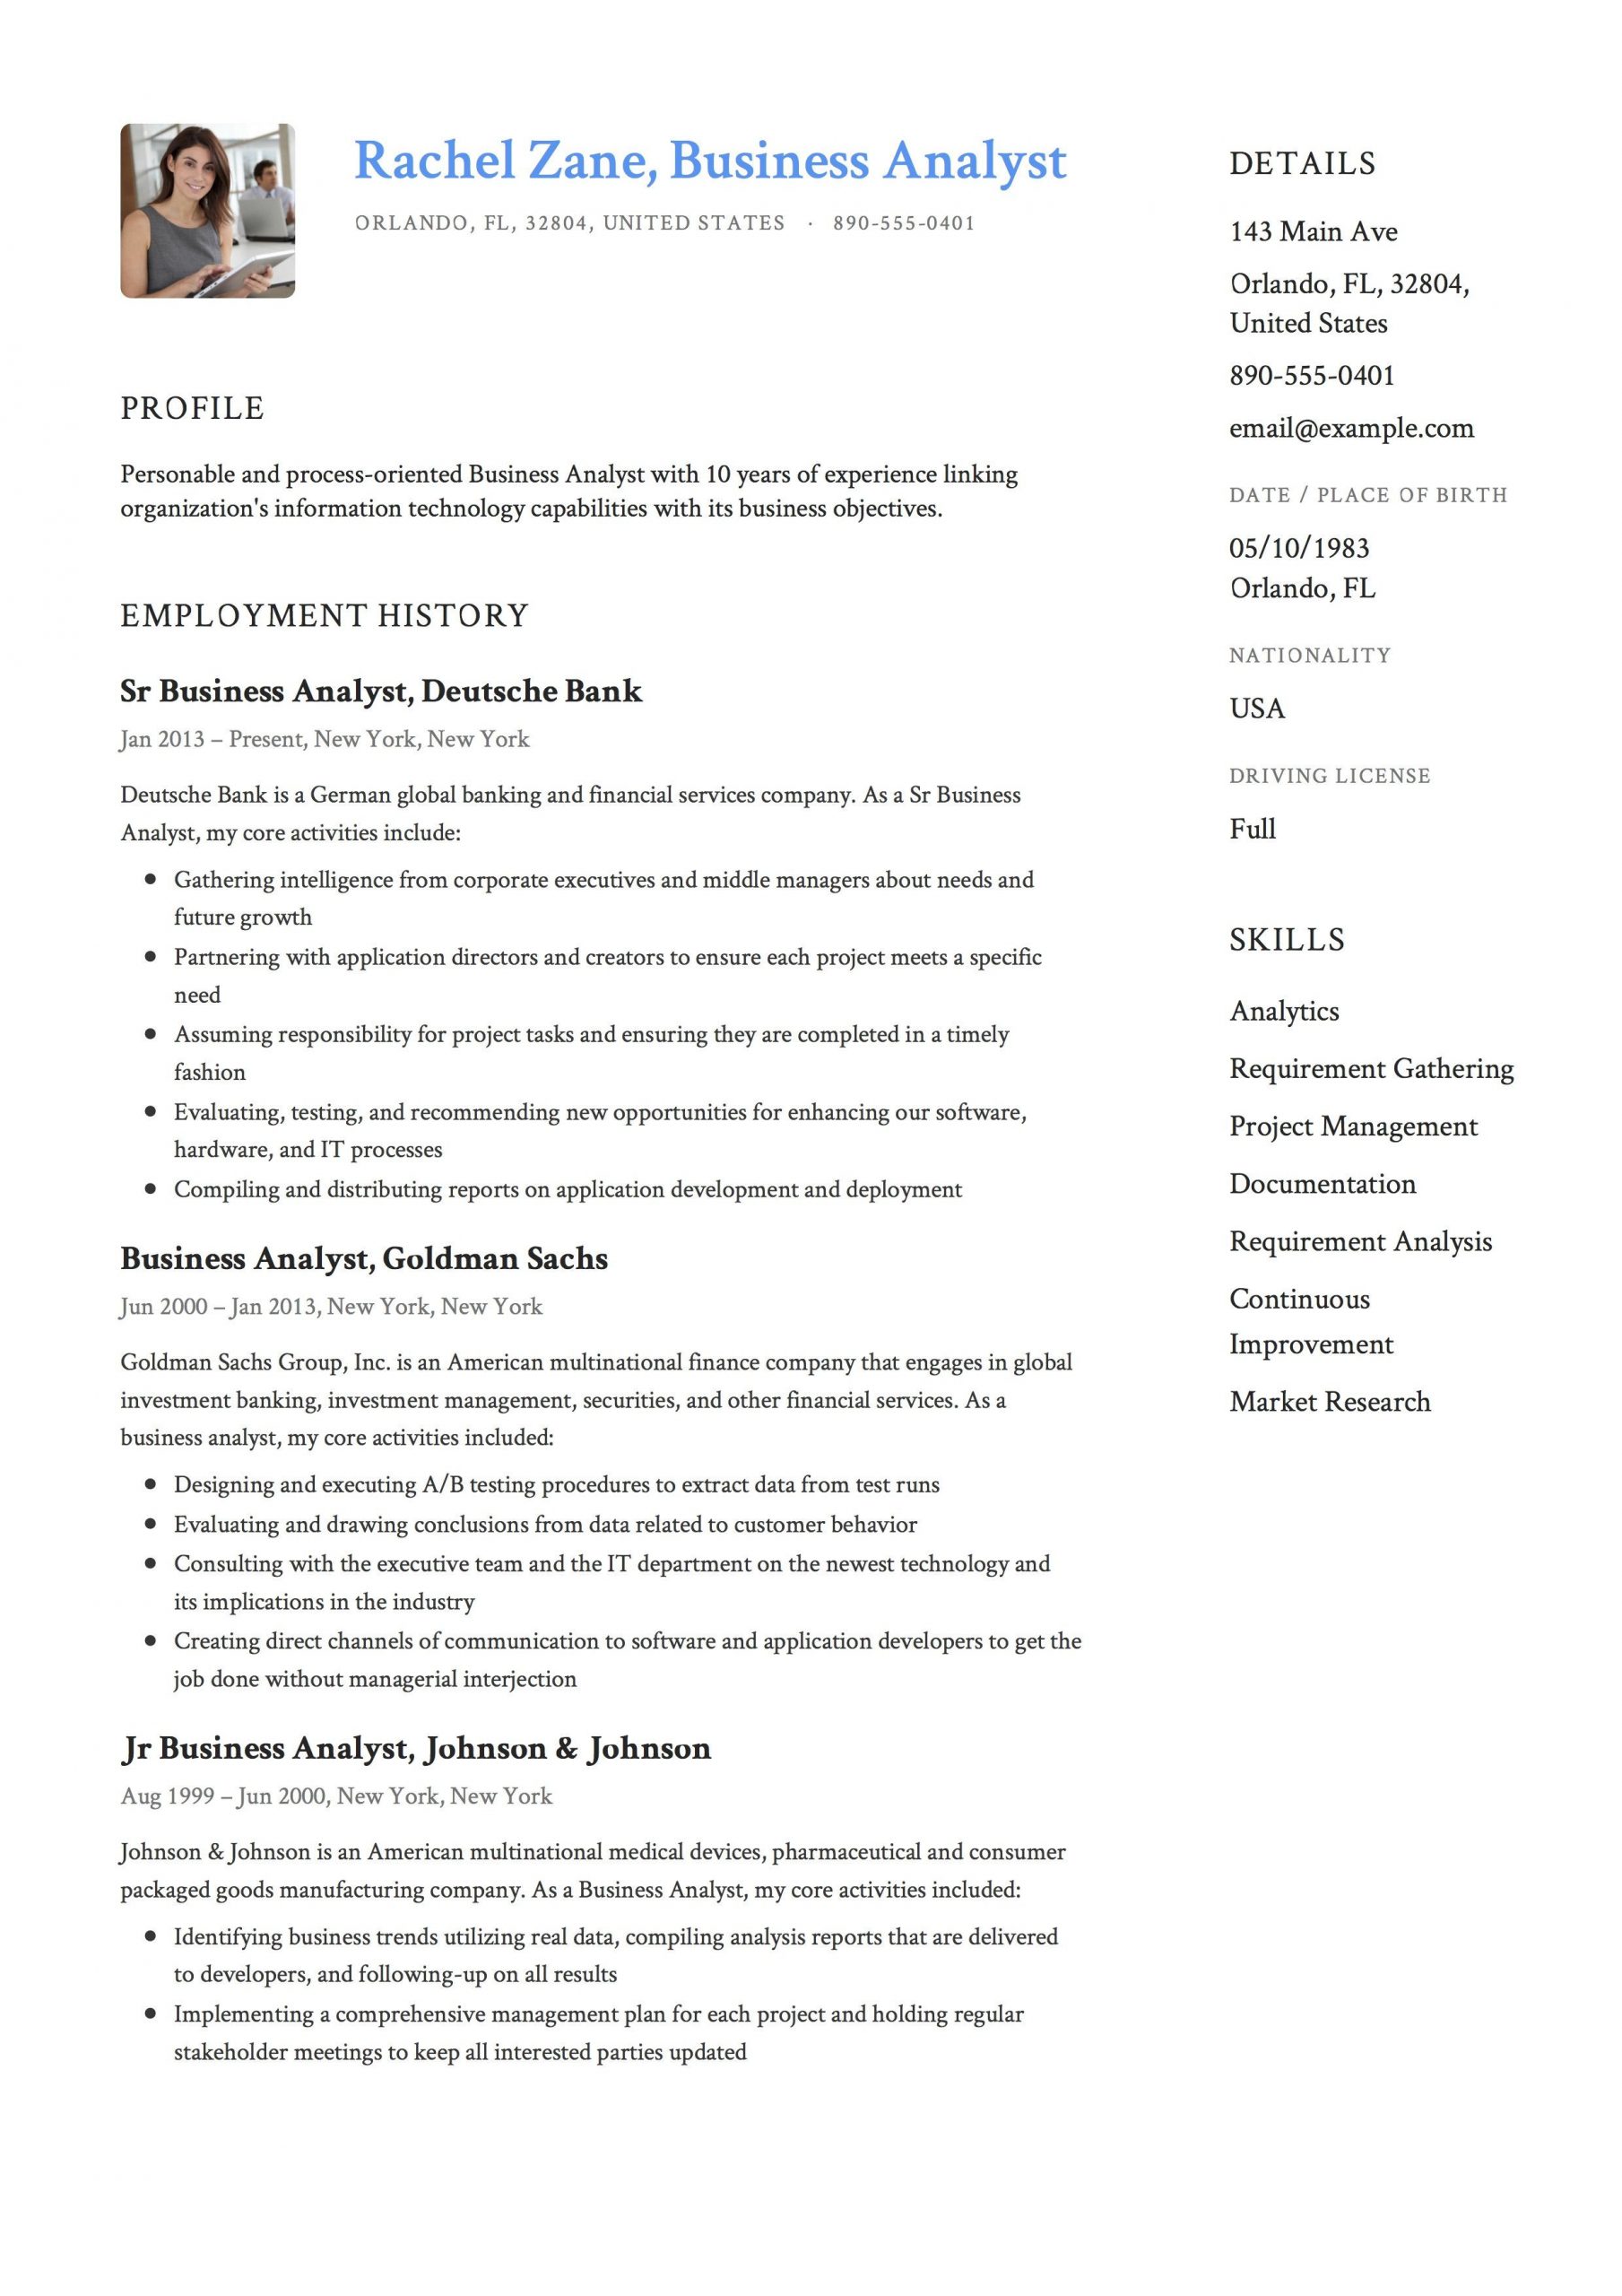 Business Analyst Resume Templates Free Download Business Analyst Resume Sample, Template, Example, Cv, formal …